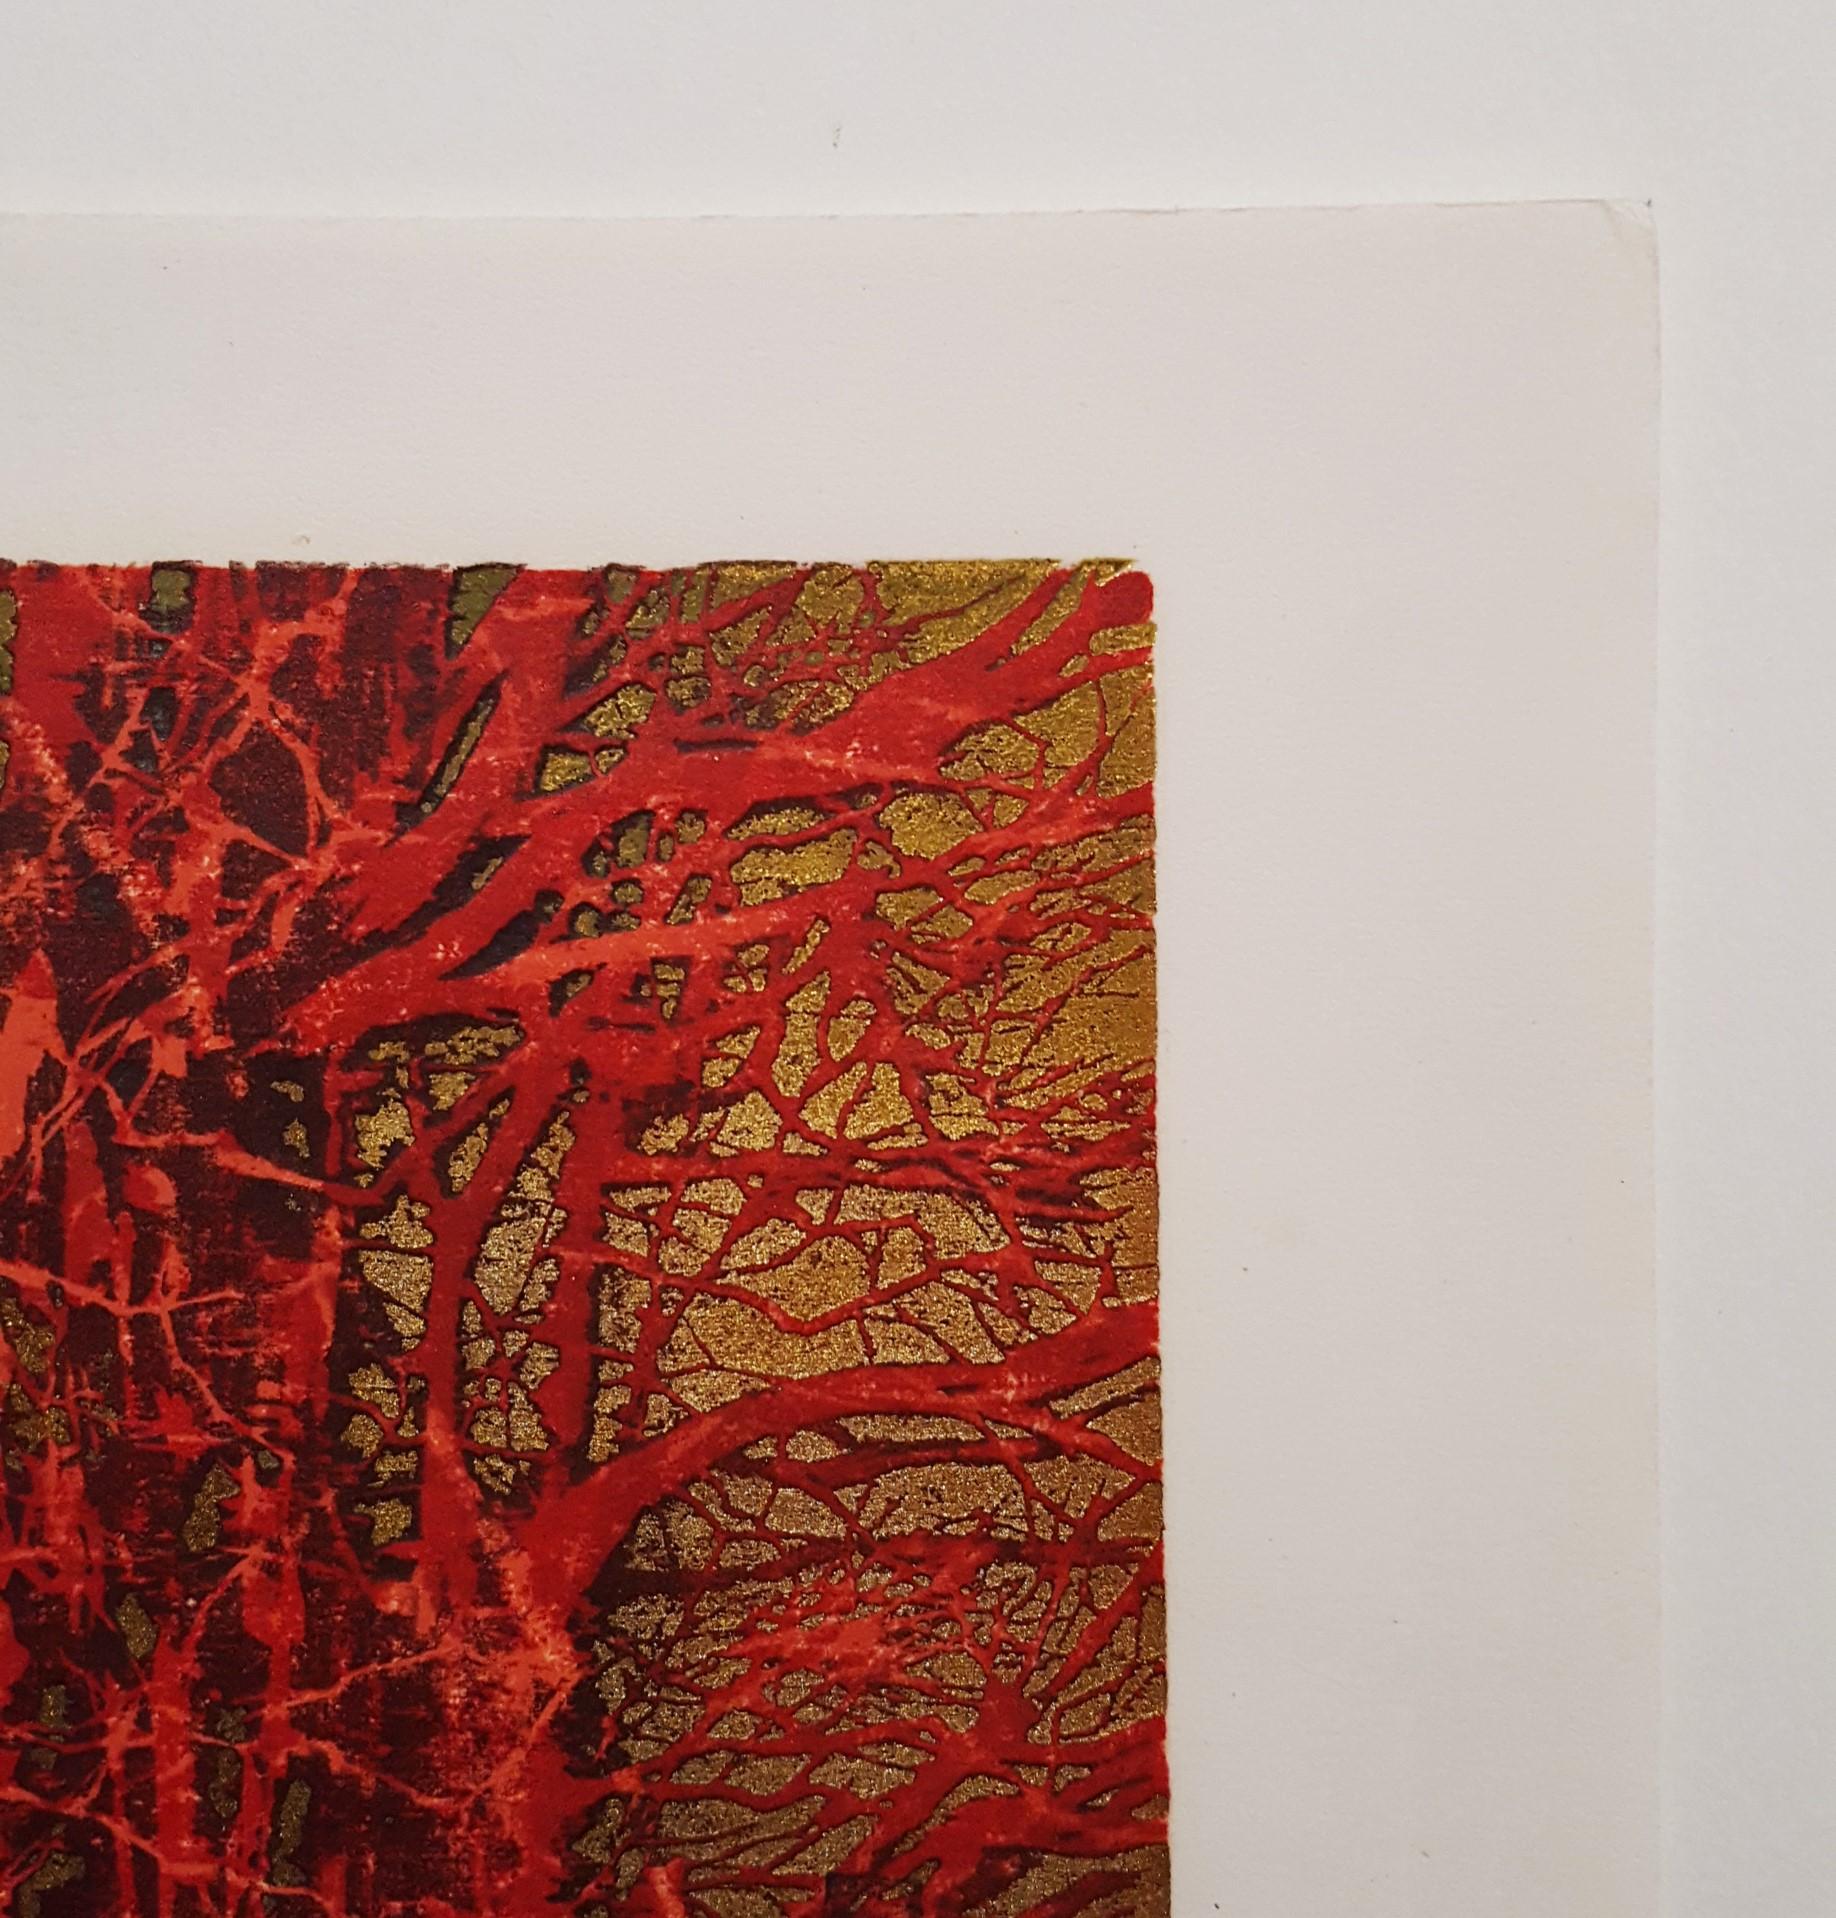 Red Branches (Akai eda) - Contemporary Print by Joichi Hoshi